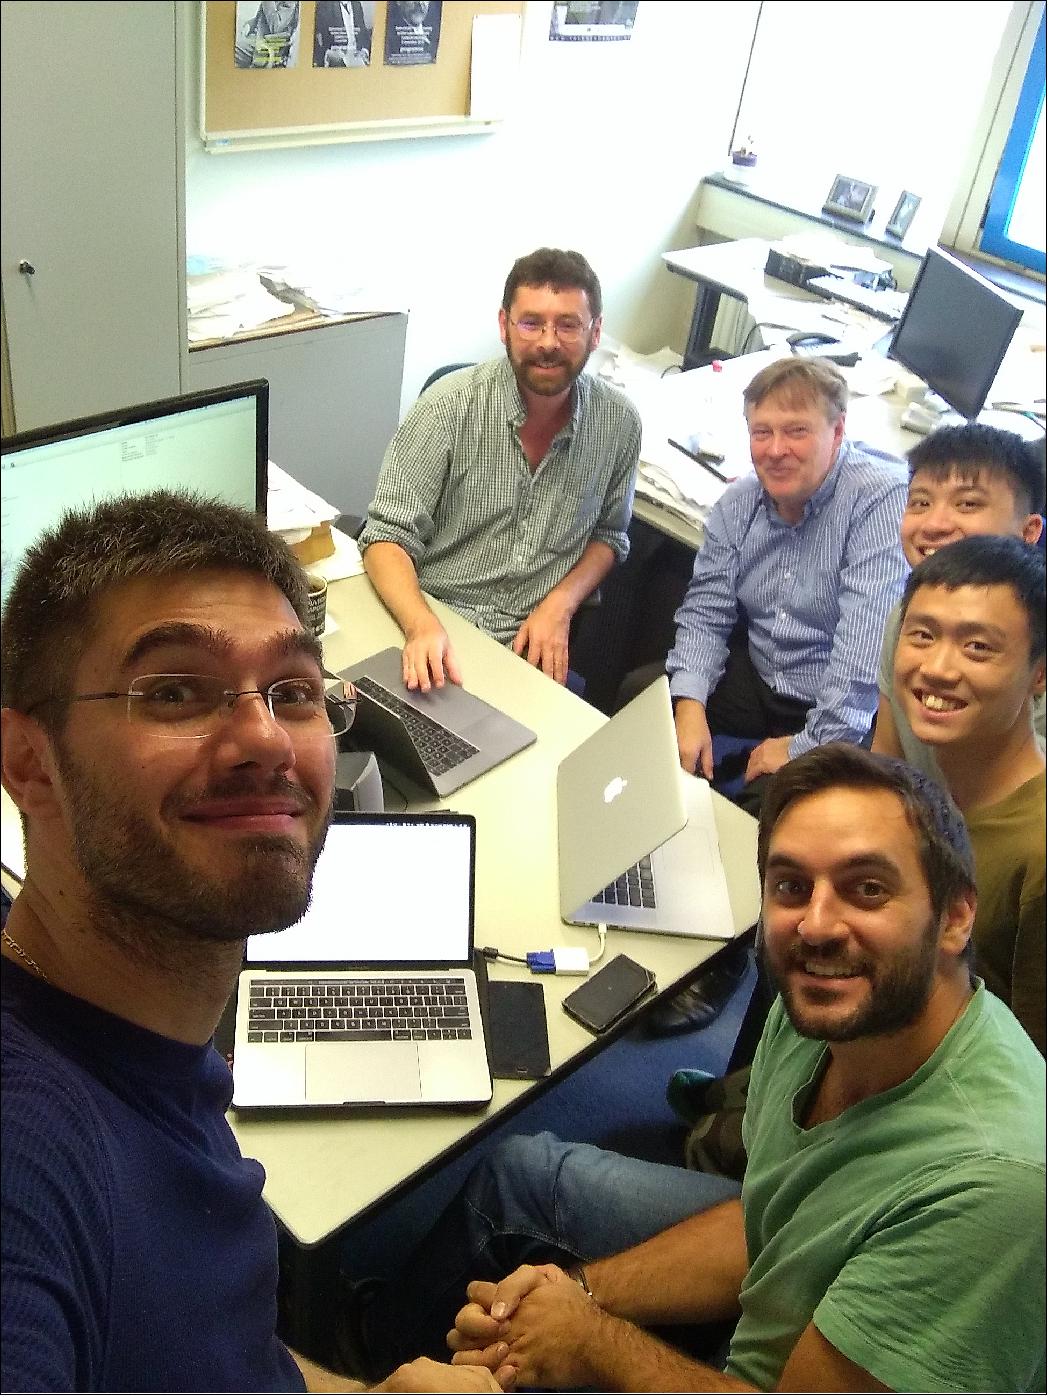 Figure 34: 'The six happiest people in the world' on August 17, 2017. Salvatore Vitale (left) snapped this photo moments after first seeing the LLO scan. The tell-tale trace of gravitational waves generated by merging neutron stars was clearly visible. Clockwise from top: Chris van den Broeck, Jo van den Brand, Peter Pang, Ka Wa Tsang, and Michalis Agathos (image credit: Salvo Vitale)